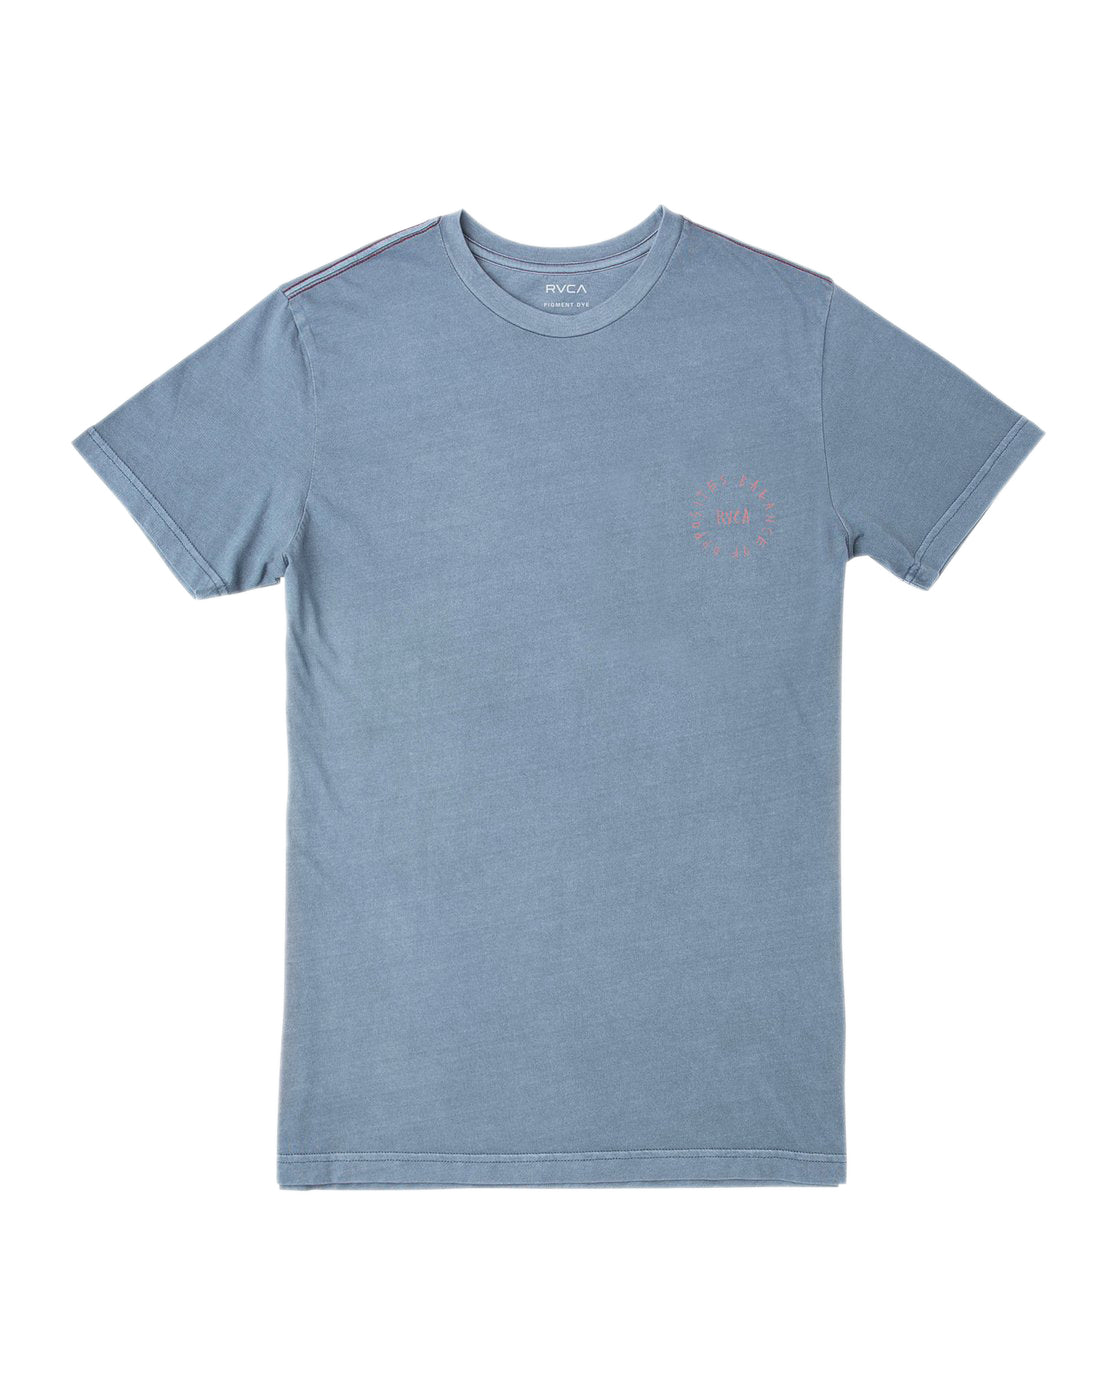 RVCA Hortonsphere SS Tee CNB-ChinaBlue M